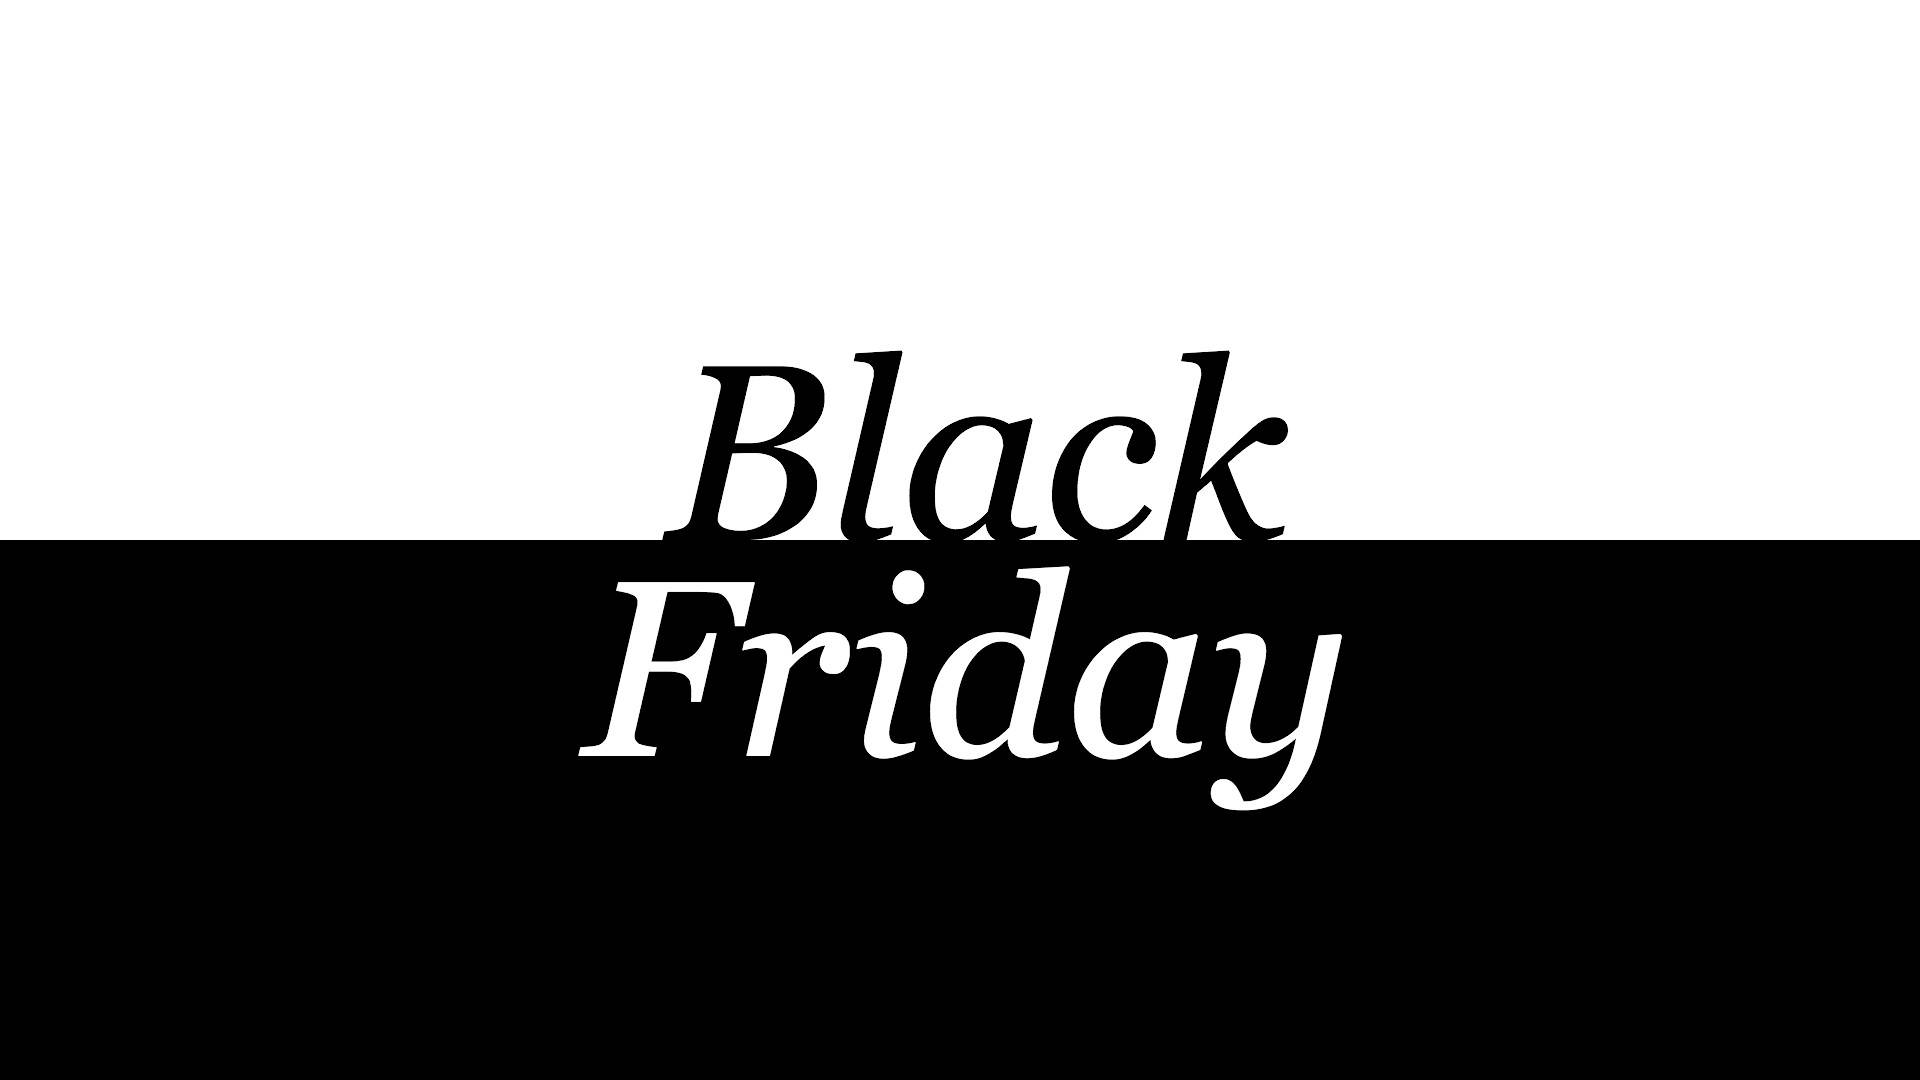 Black Friday Impactful Shopping Discounts In Black And White